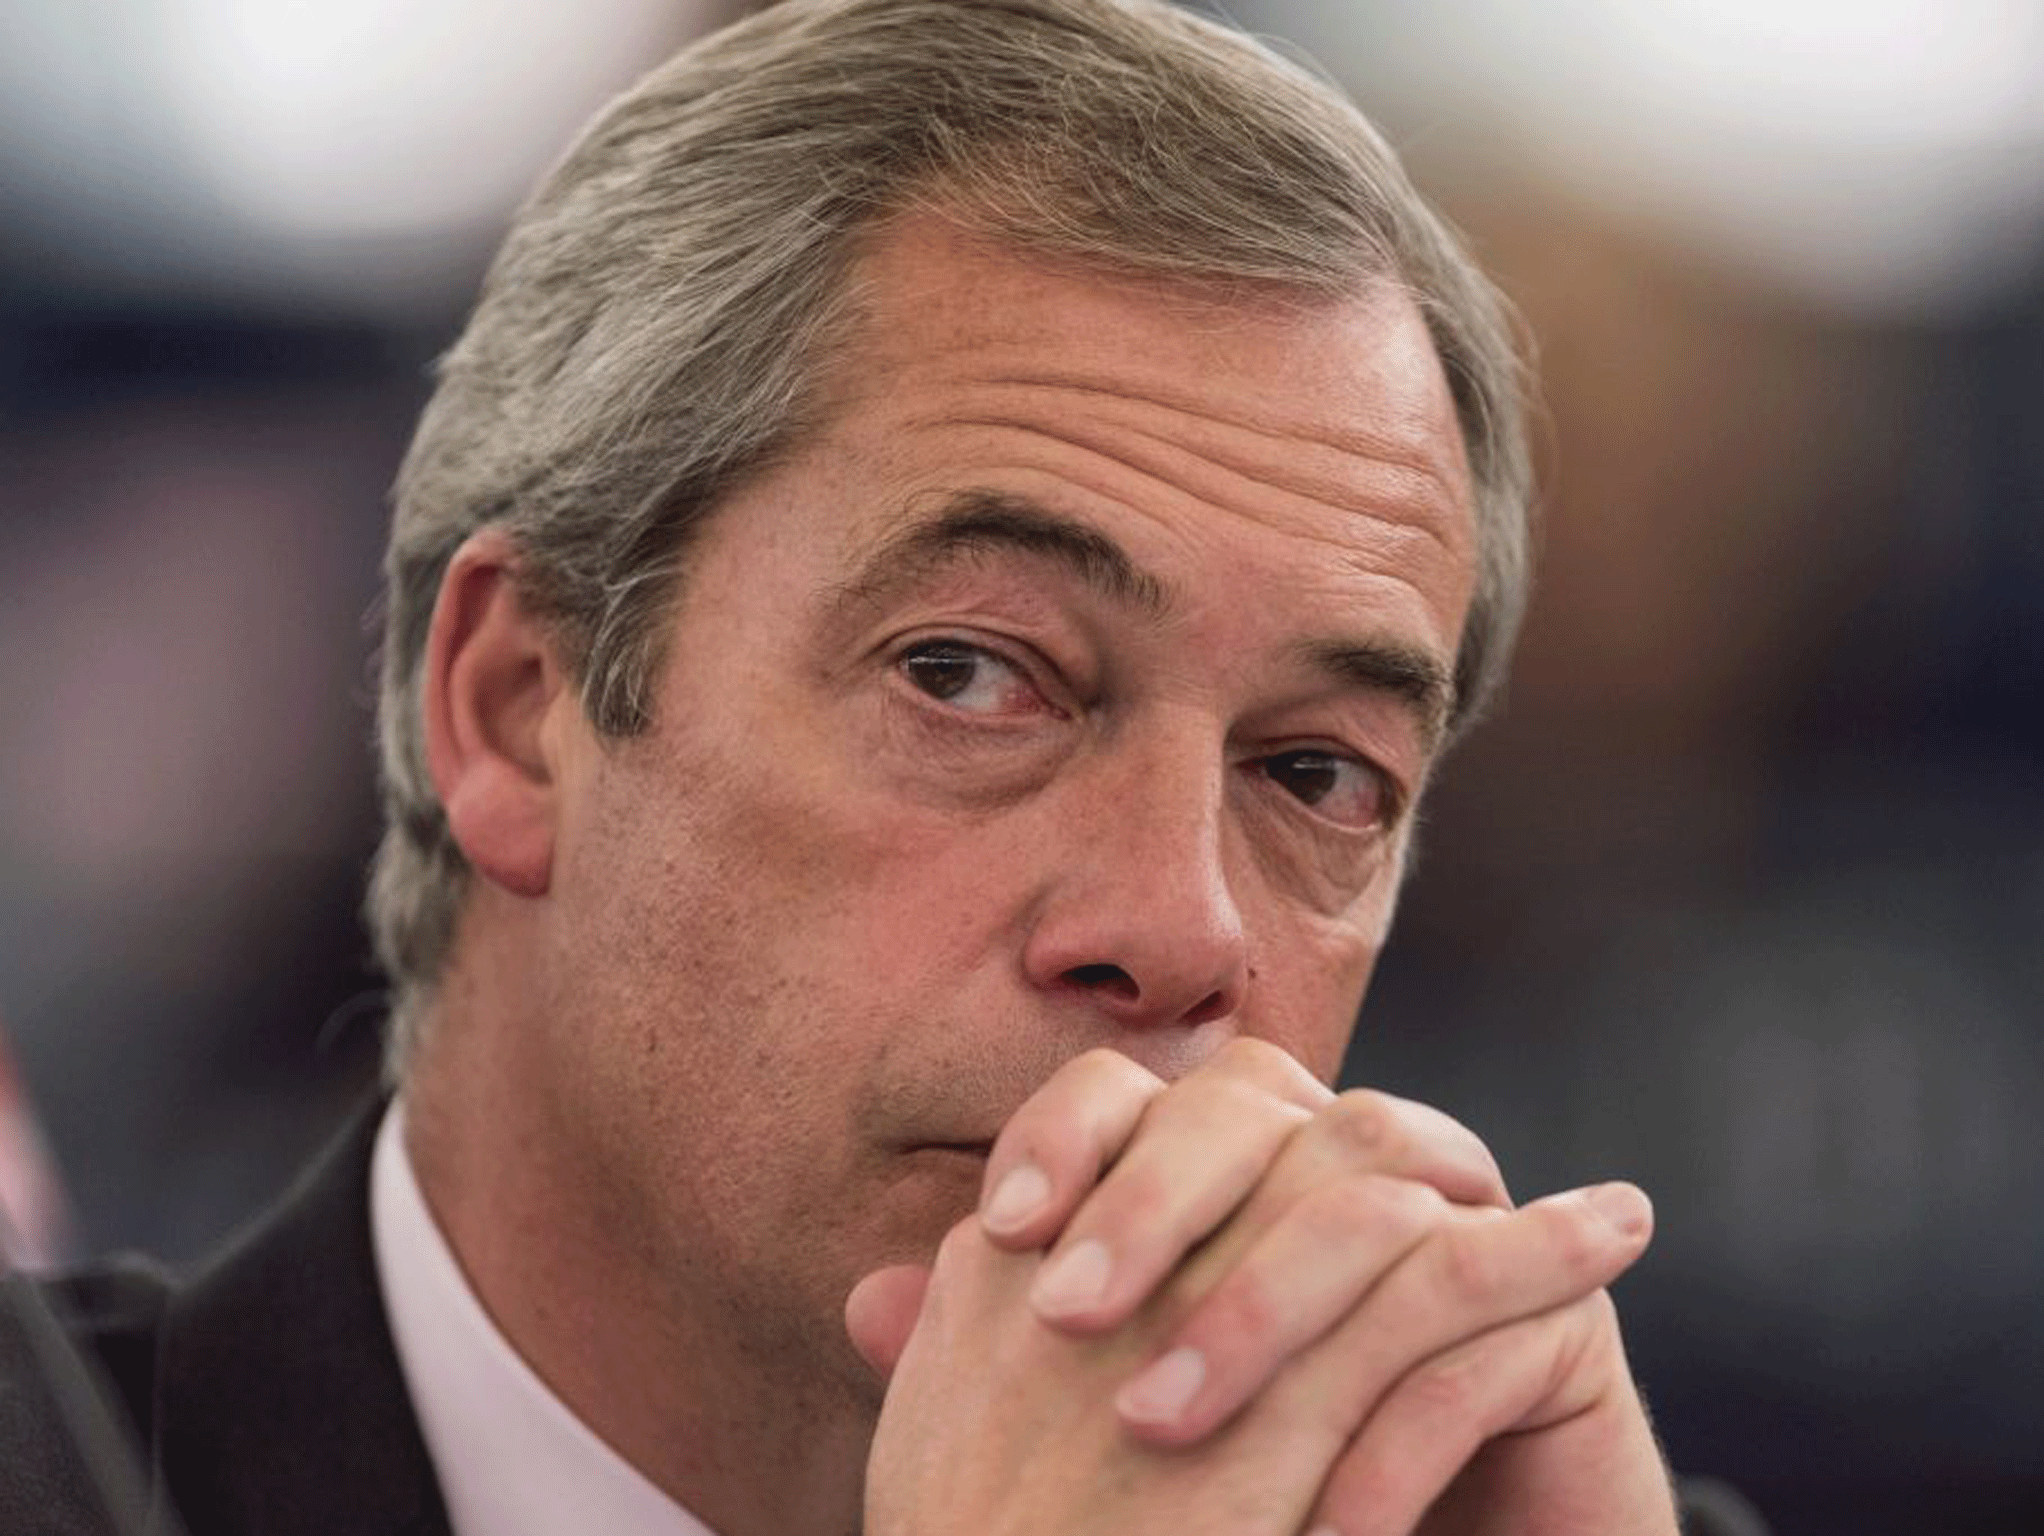 Nigel Farage sharing £4million house with female French politician